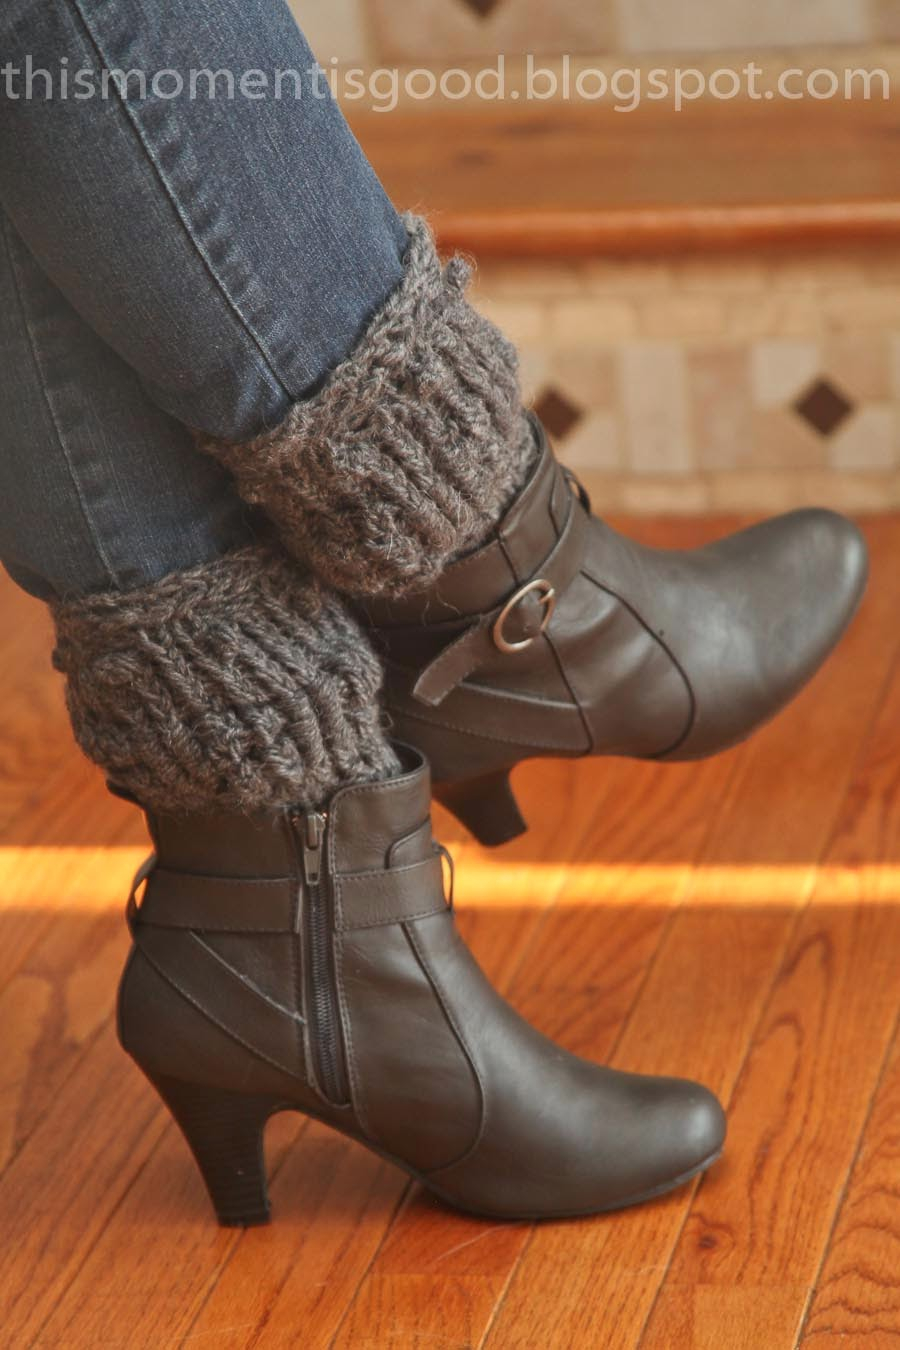 Free Knitting Patterns For Boot Toppers Loom Knit Textured Boot Topperscuffs Loom Knitting This Moment